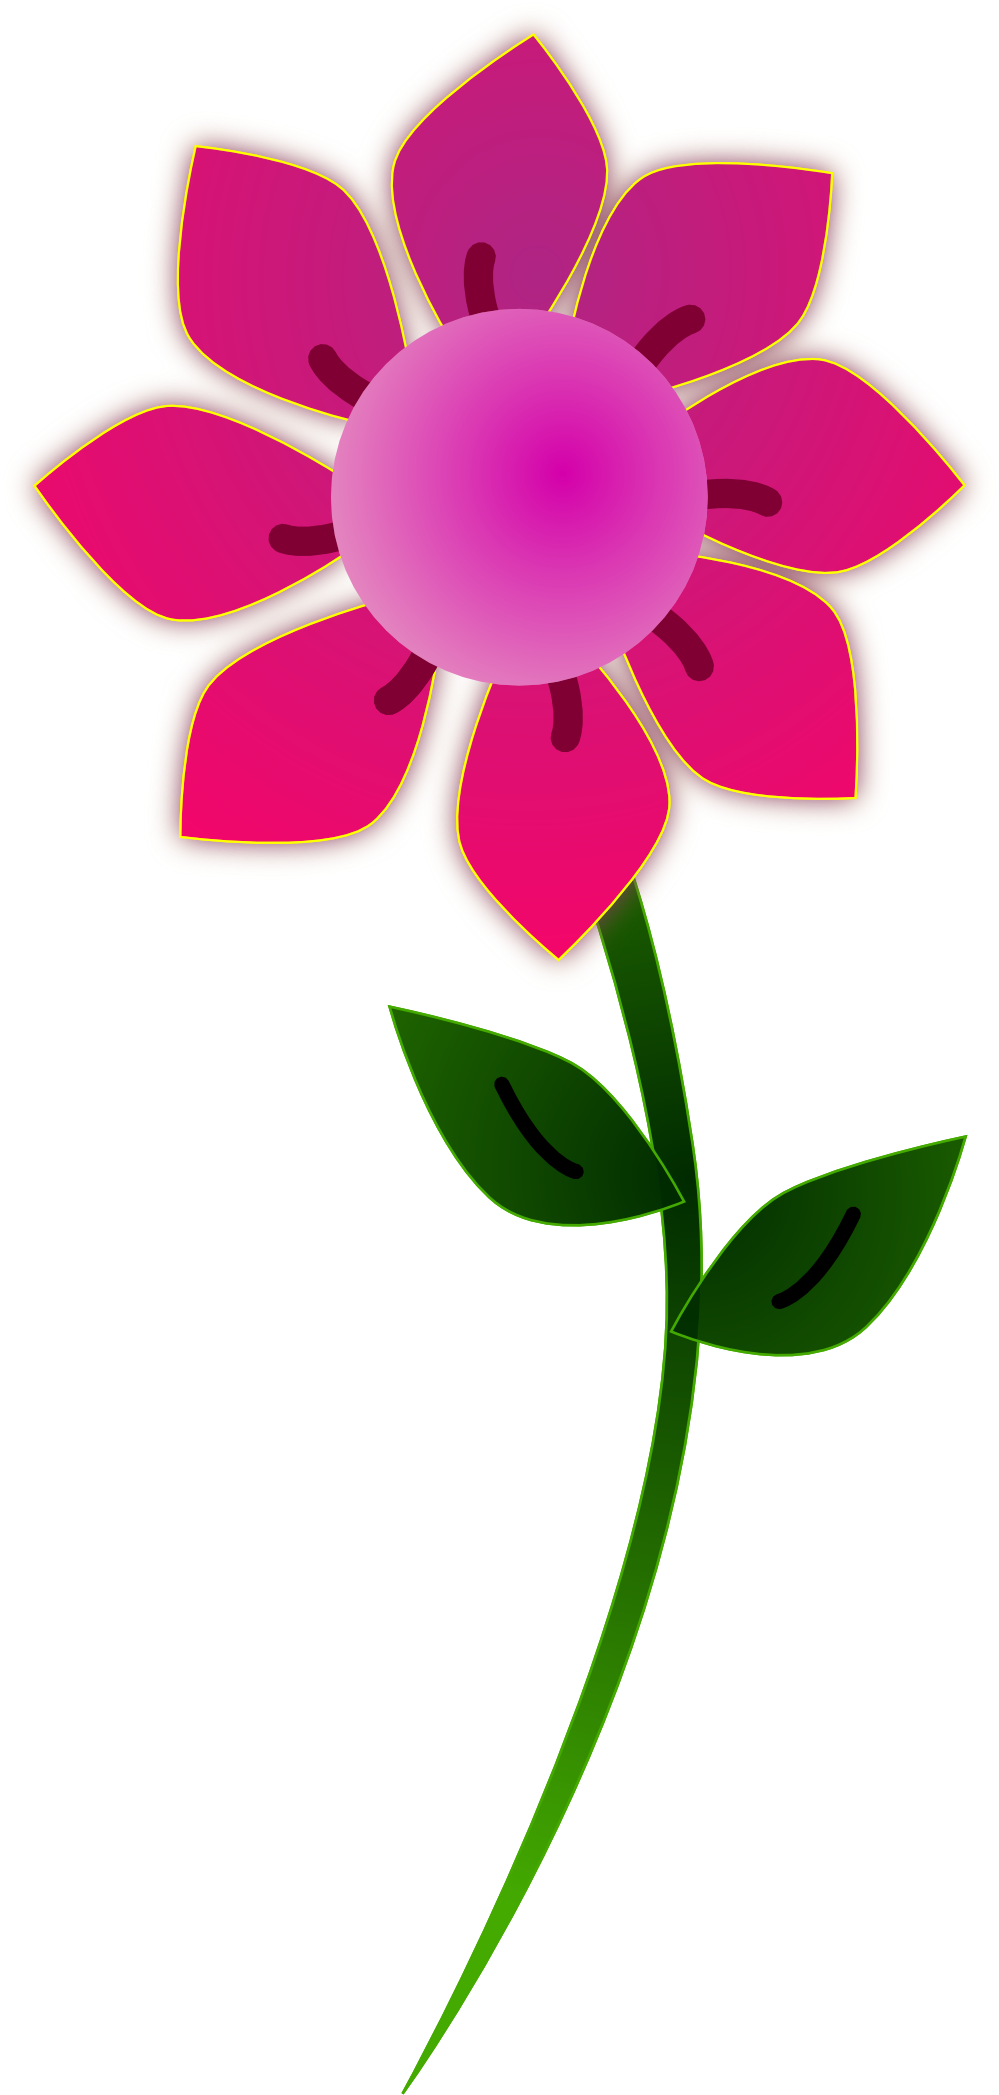 flowers clipart download - photo #34